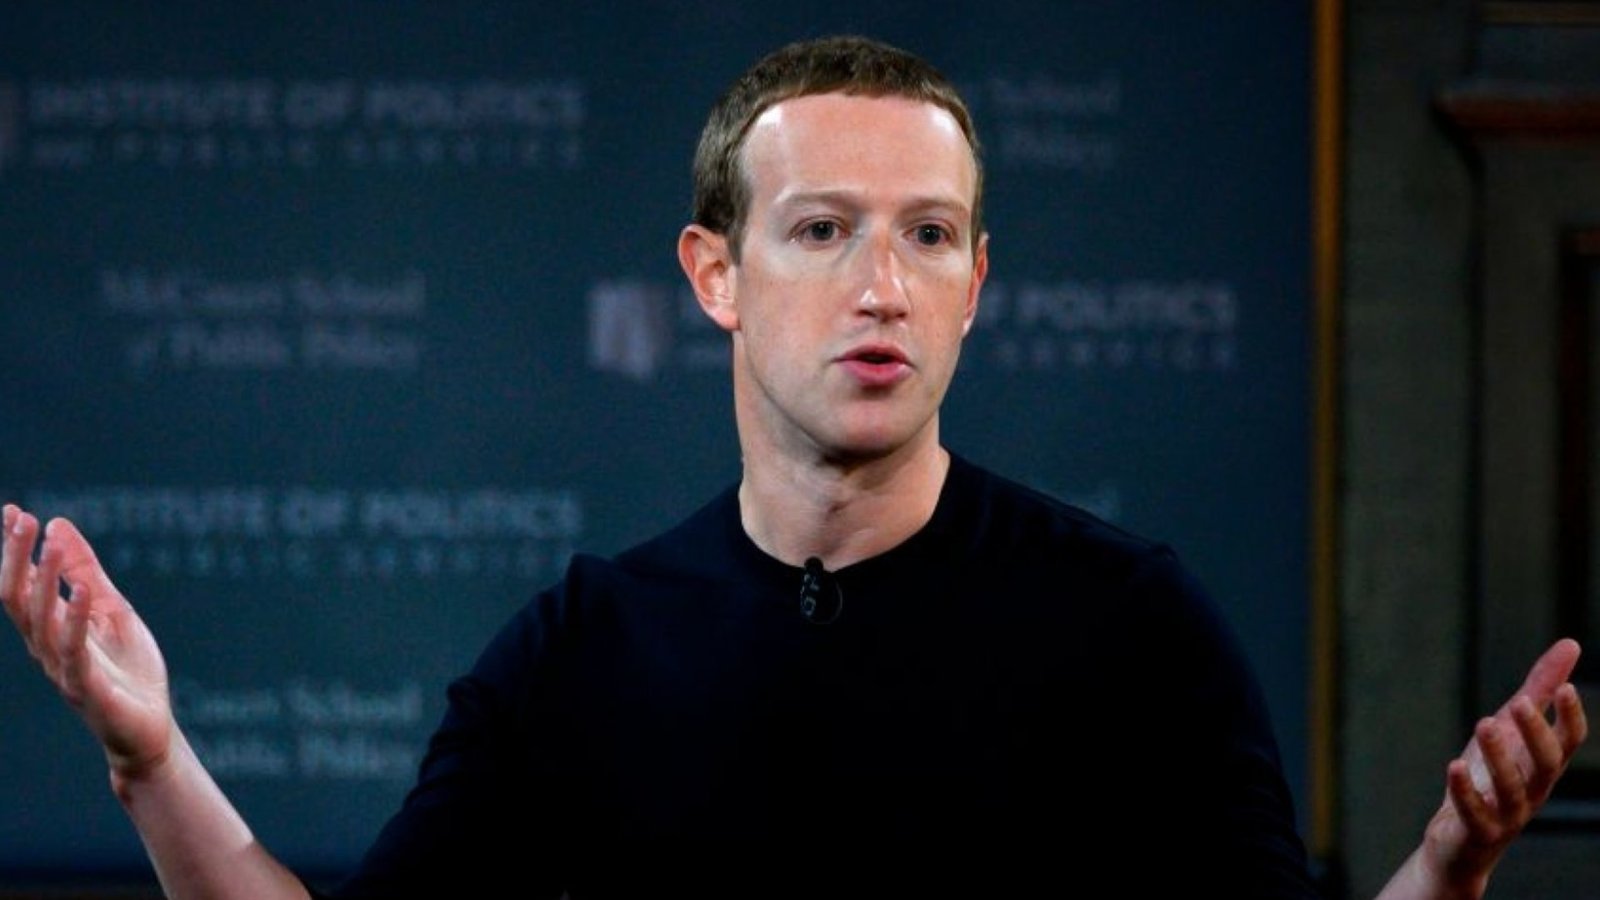 Facebook won’t be “Facebook” anymore: Zuckerberg plans to change the name